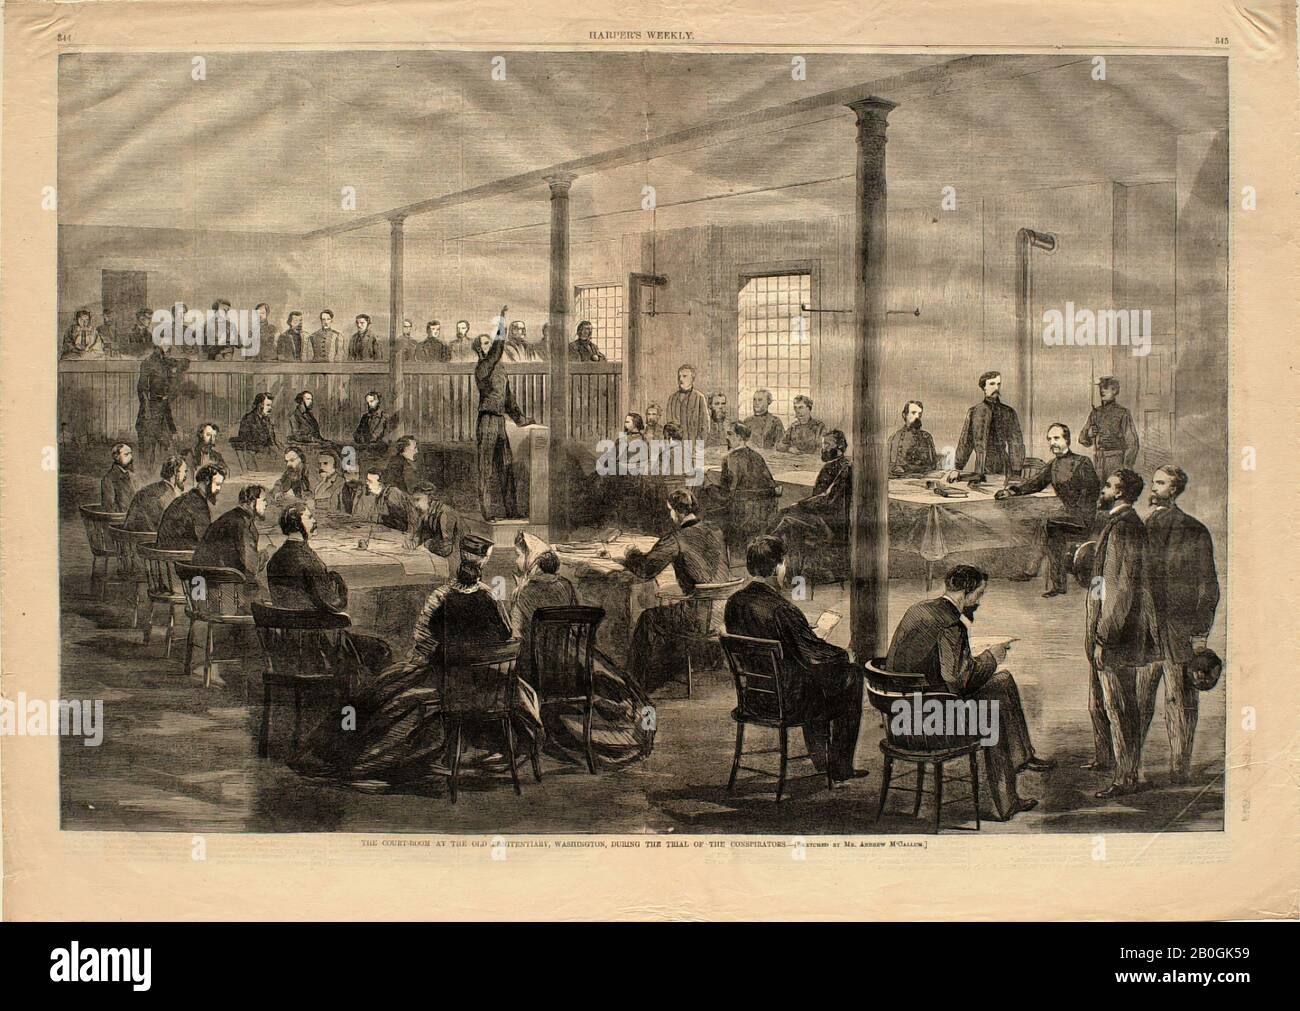 Andrew McCallum, English, 18211902, The Court-Room of the Old Penitentiary, Washington,...Trial of the Conspirators, 1865, Wood engraving on paper, image: 13 11/16 x 20 5/8 in. (34.8 x 52.4 cm Stock Photo